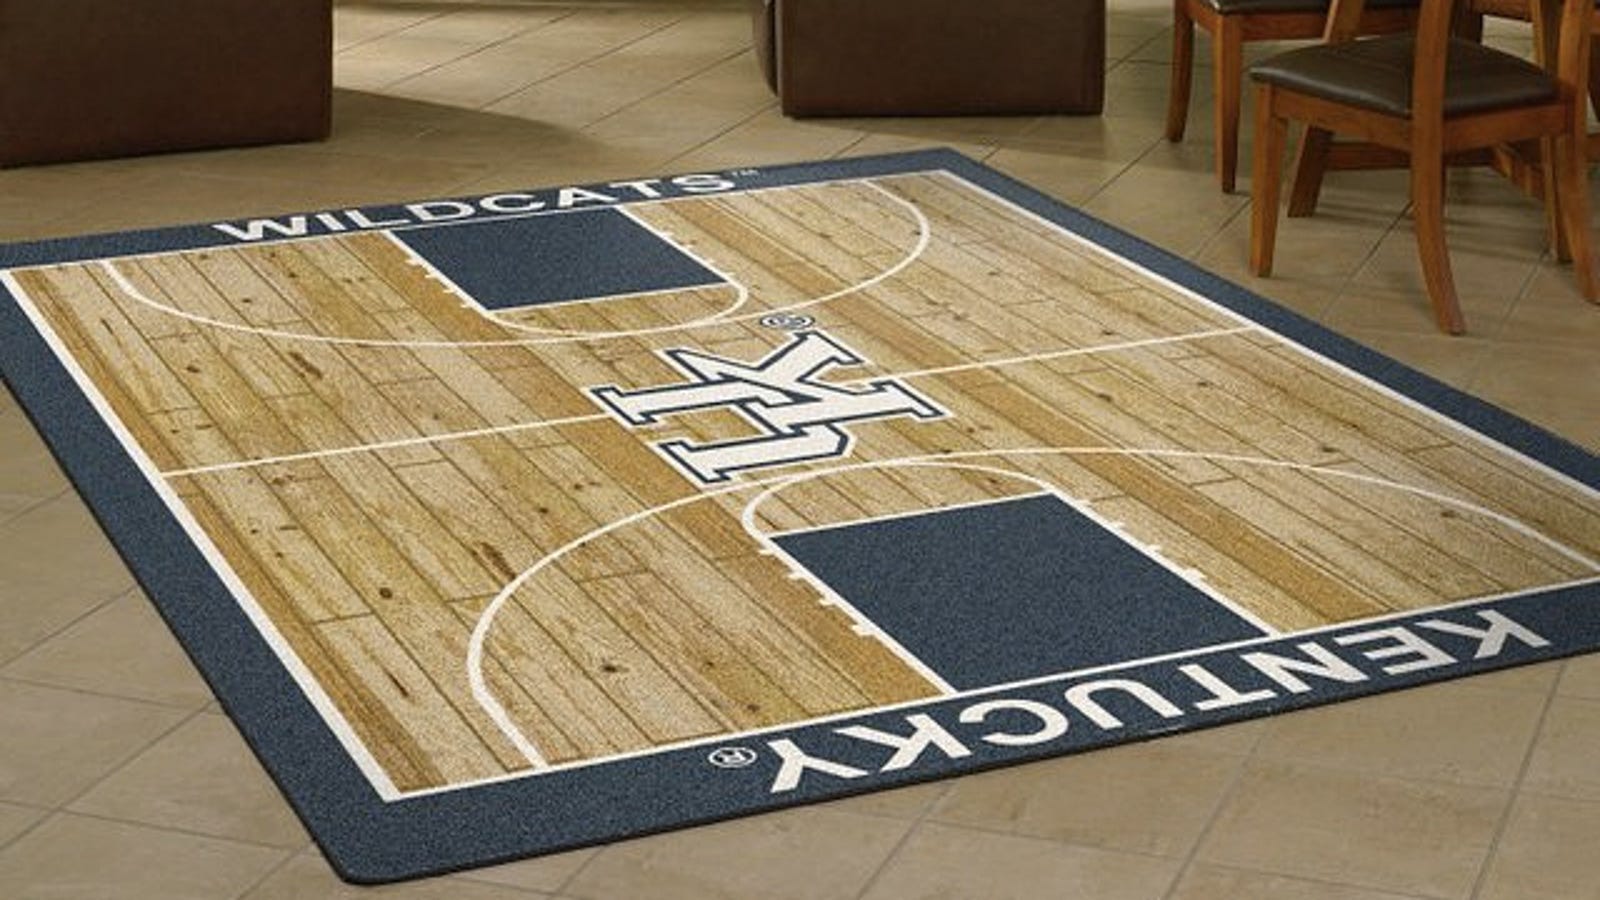 Tiny Basketball Court Rugs Give Any Room the Home Court Advantage